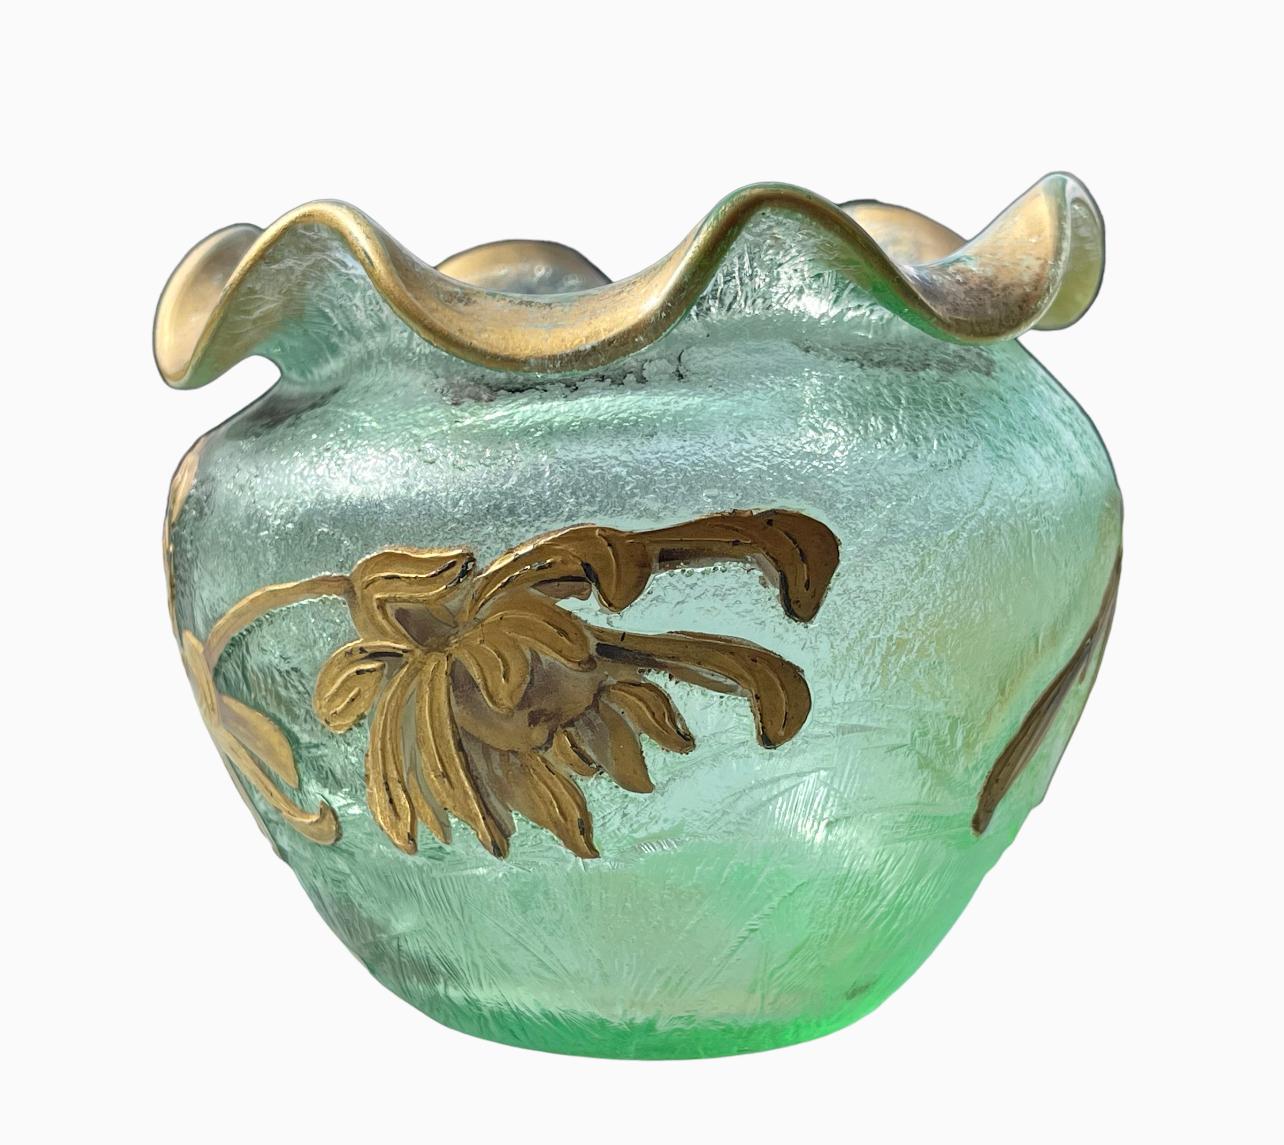 Small ball vase with wavy neck in enameled glass with acid-etched floral decoration. Enhanced with gold on an opalescent sea green background, this vase is in perfect condition.

Dimensions
Height 8.5cm
Diameter 10cm